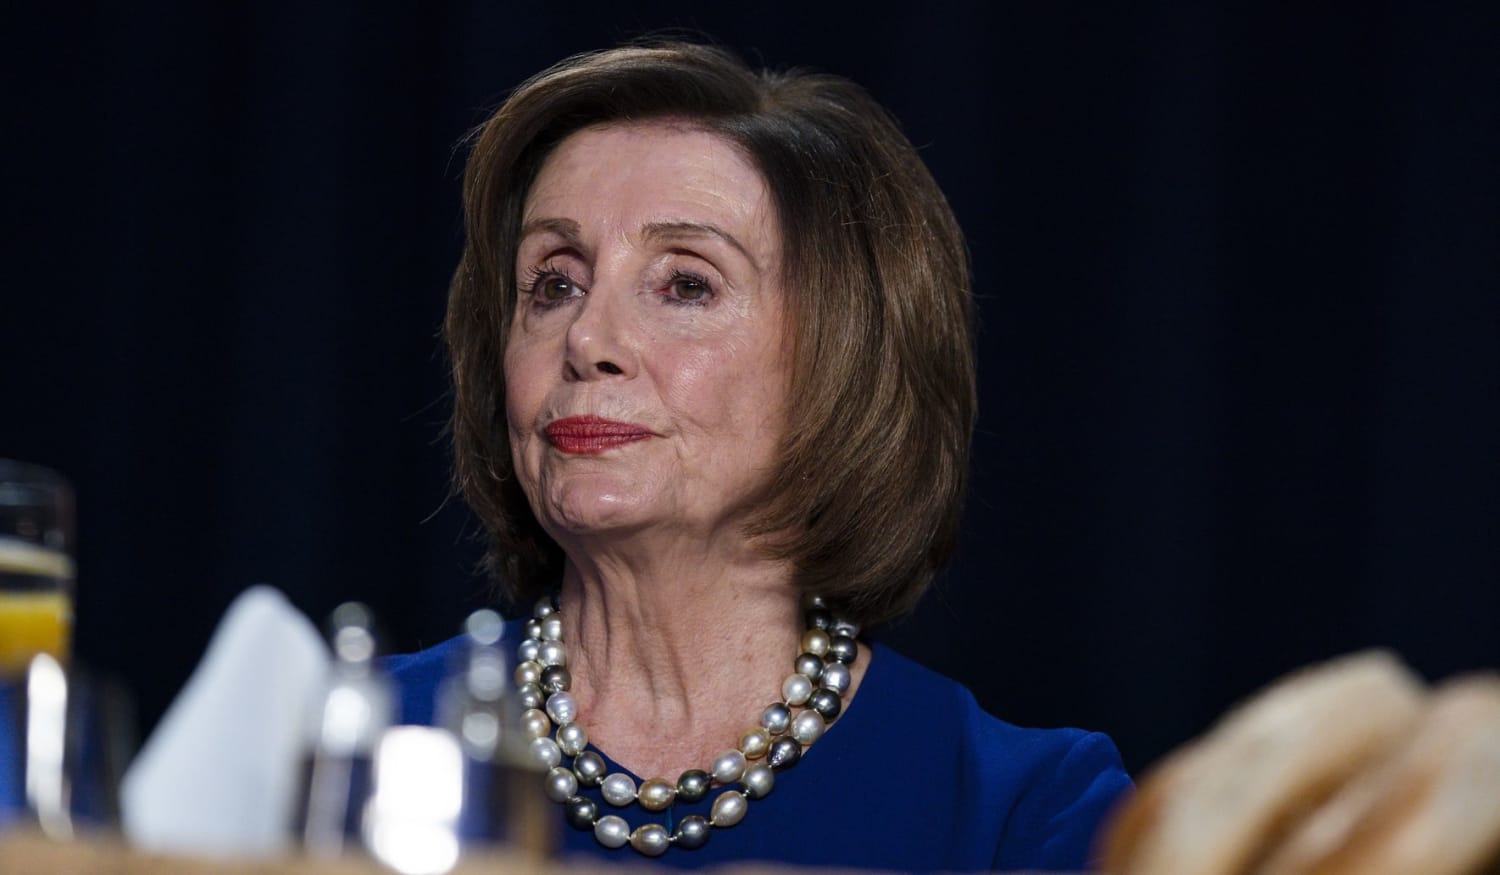 Democratic socialist set to challenge Pelosi after placing 2nd in primary